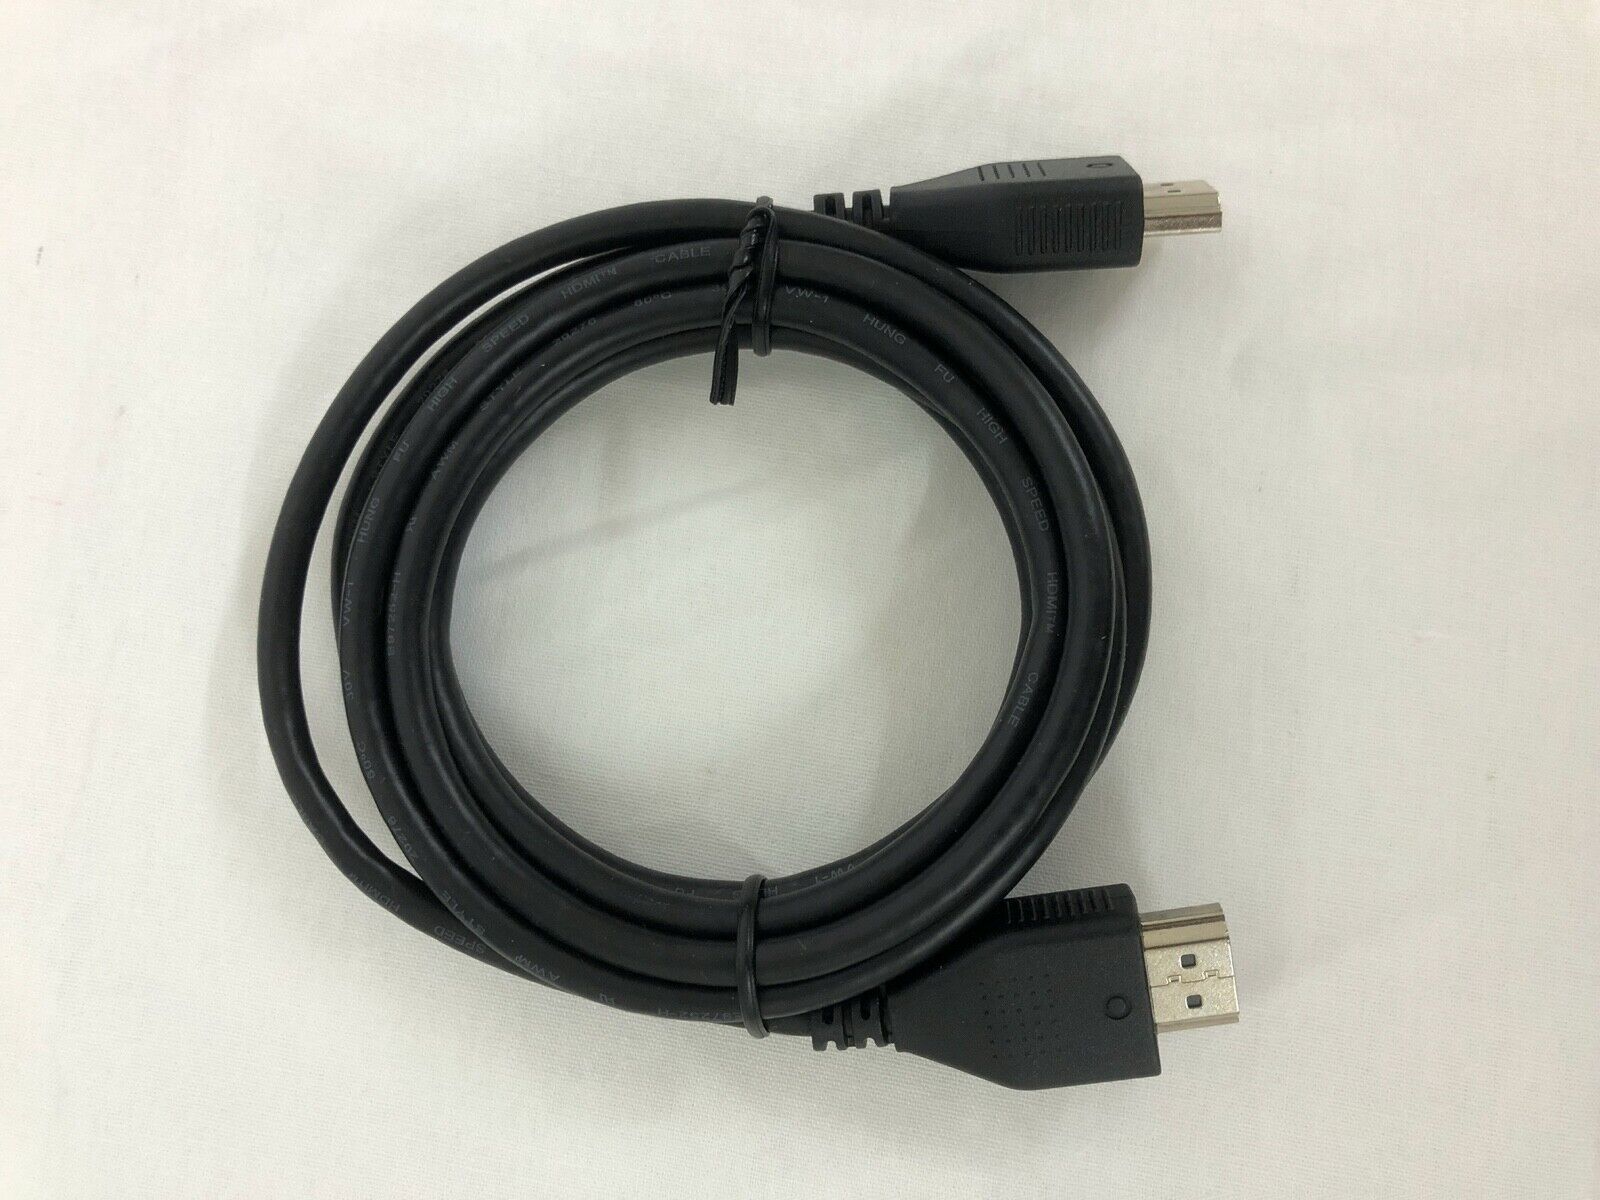 OEM 5ft OFFICIAL Sony PlayStation 4 HDMI Genuine Original Cable Cord 4K HD | eBay